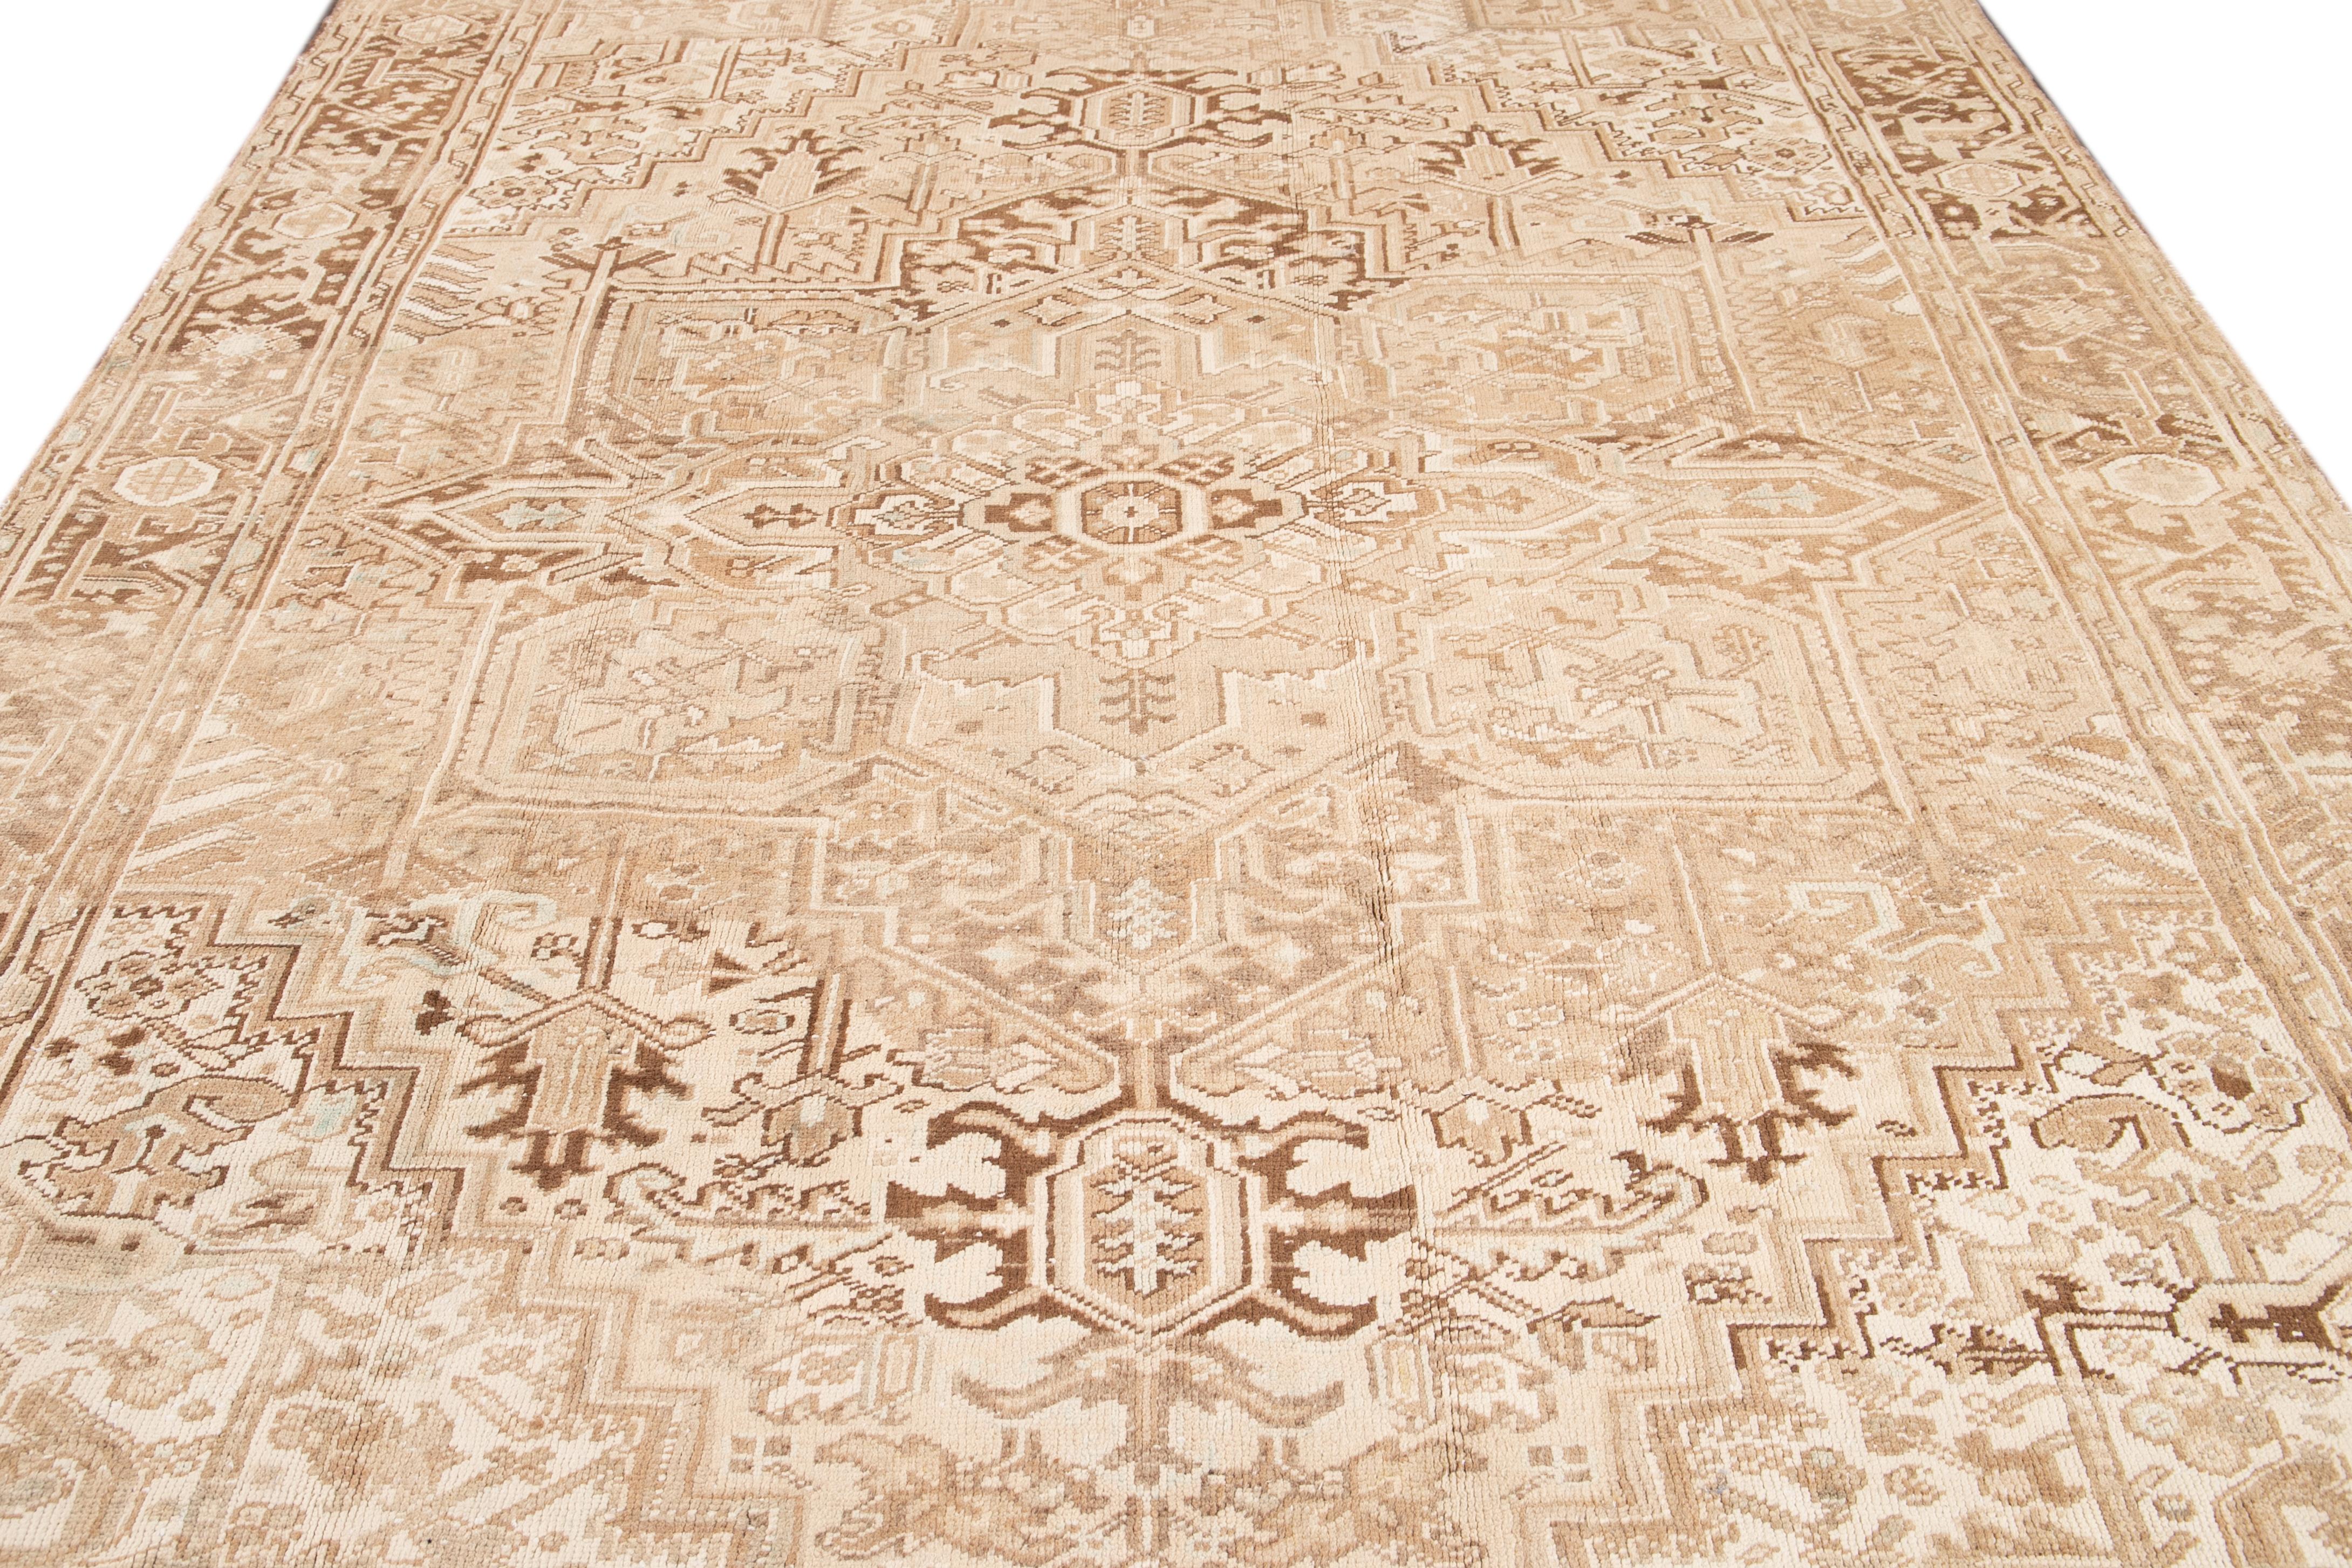 The antique Heriz rug showcases a refined and timeless elegance with its impressive all-over design and hand-knotted wool construction. The soft beige field acts as a backdrop to the eye-catching geometric floral pattern, adorned in shades of green